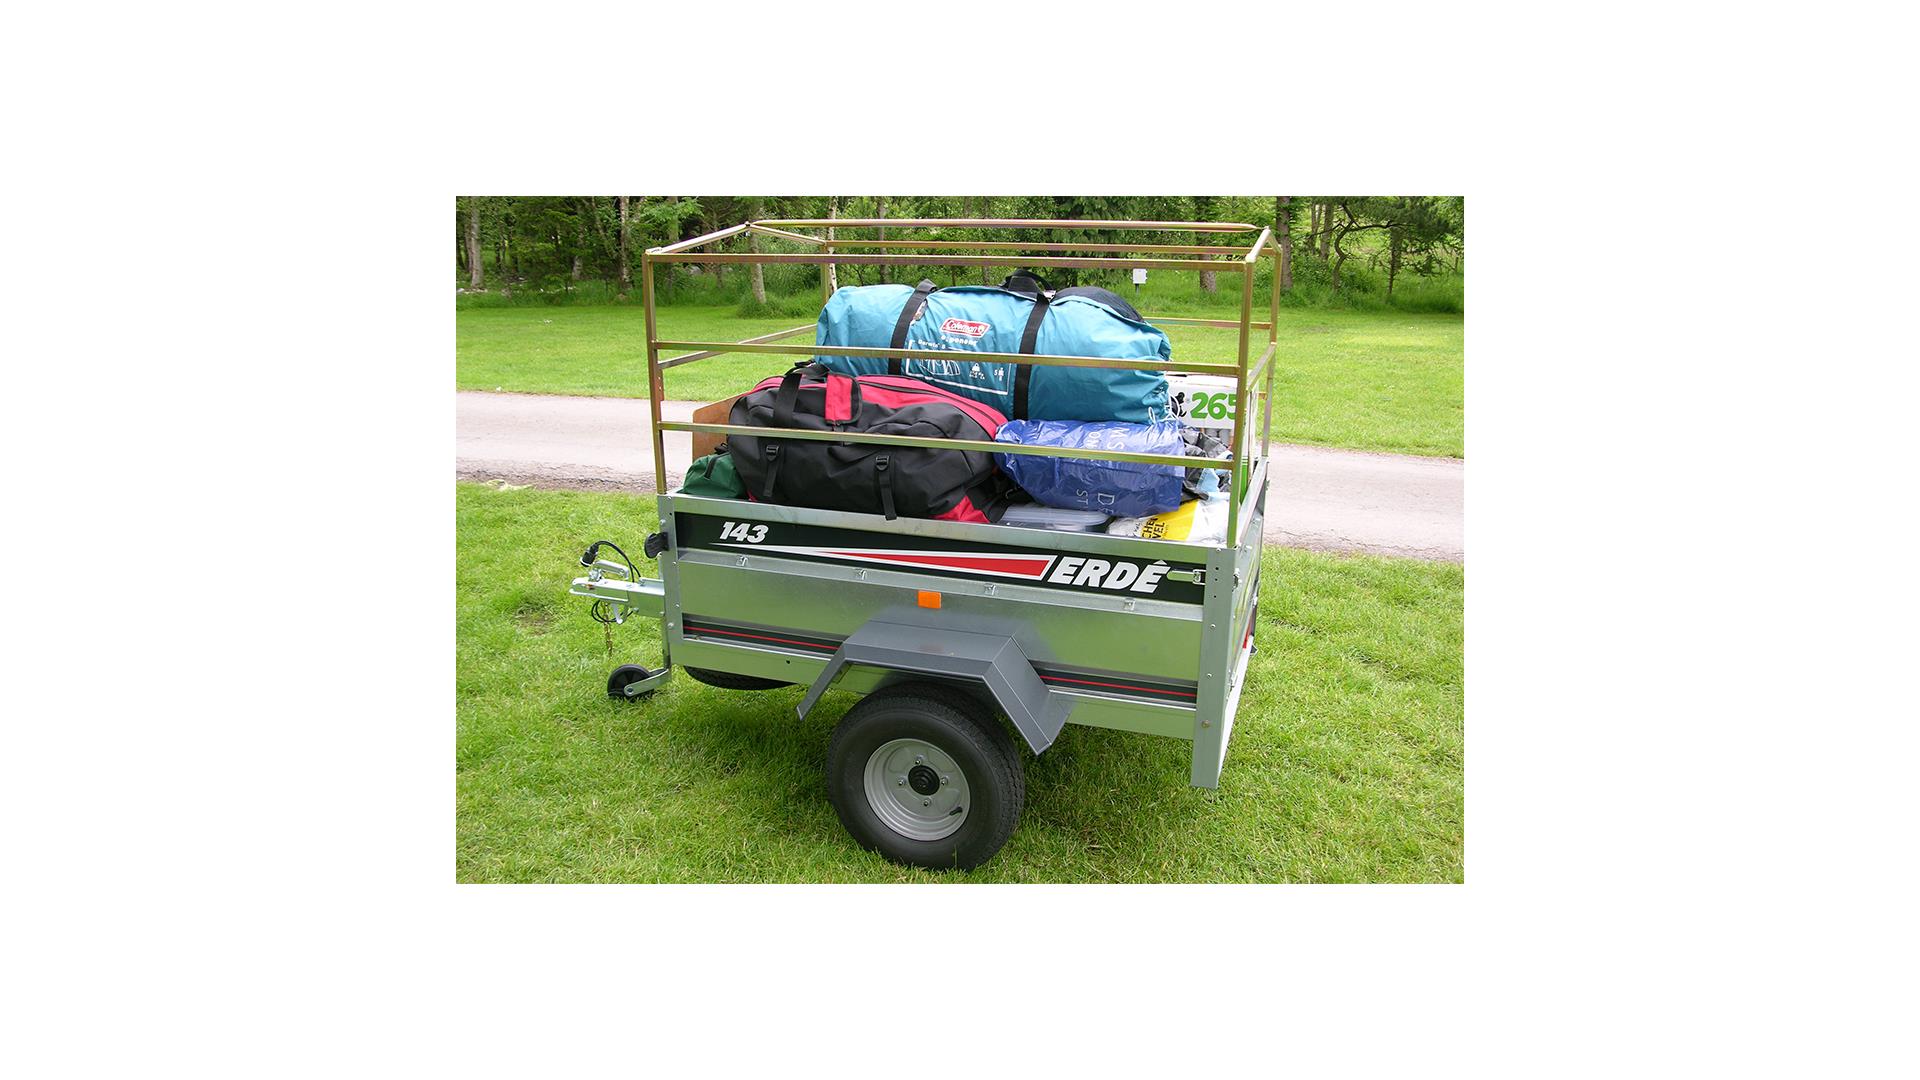 Typical unbraked trailer